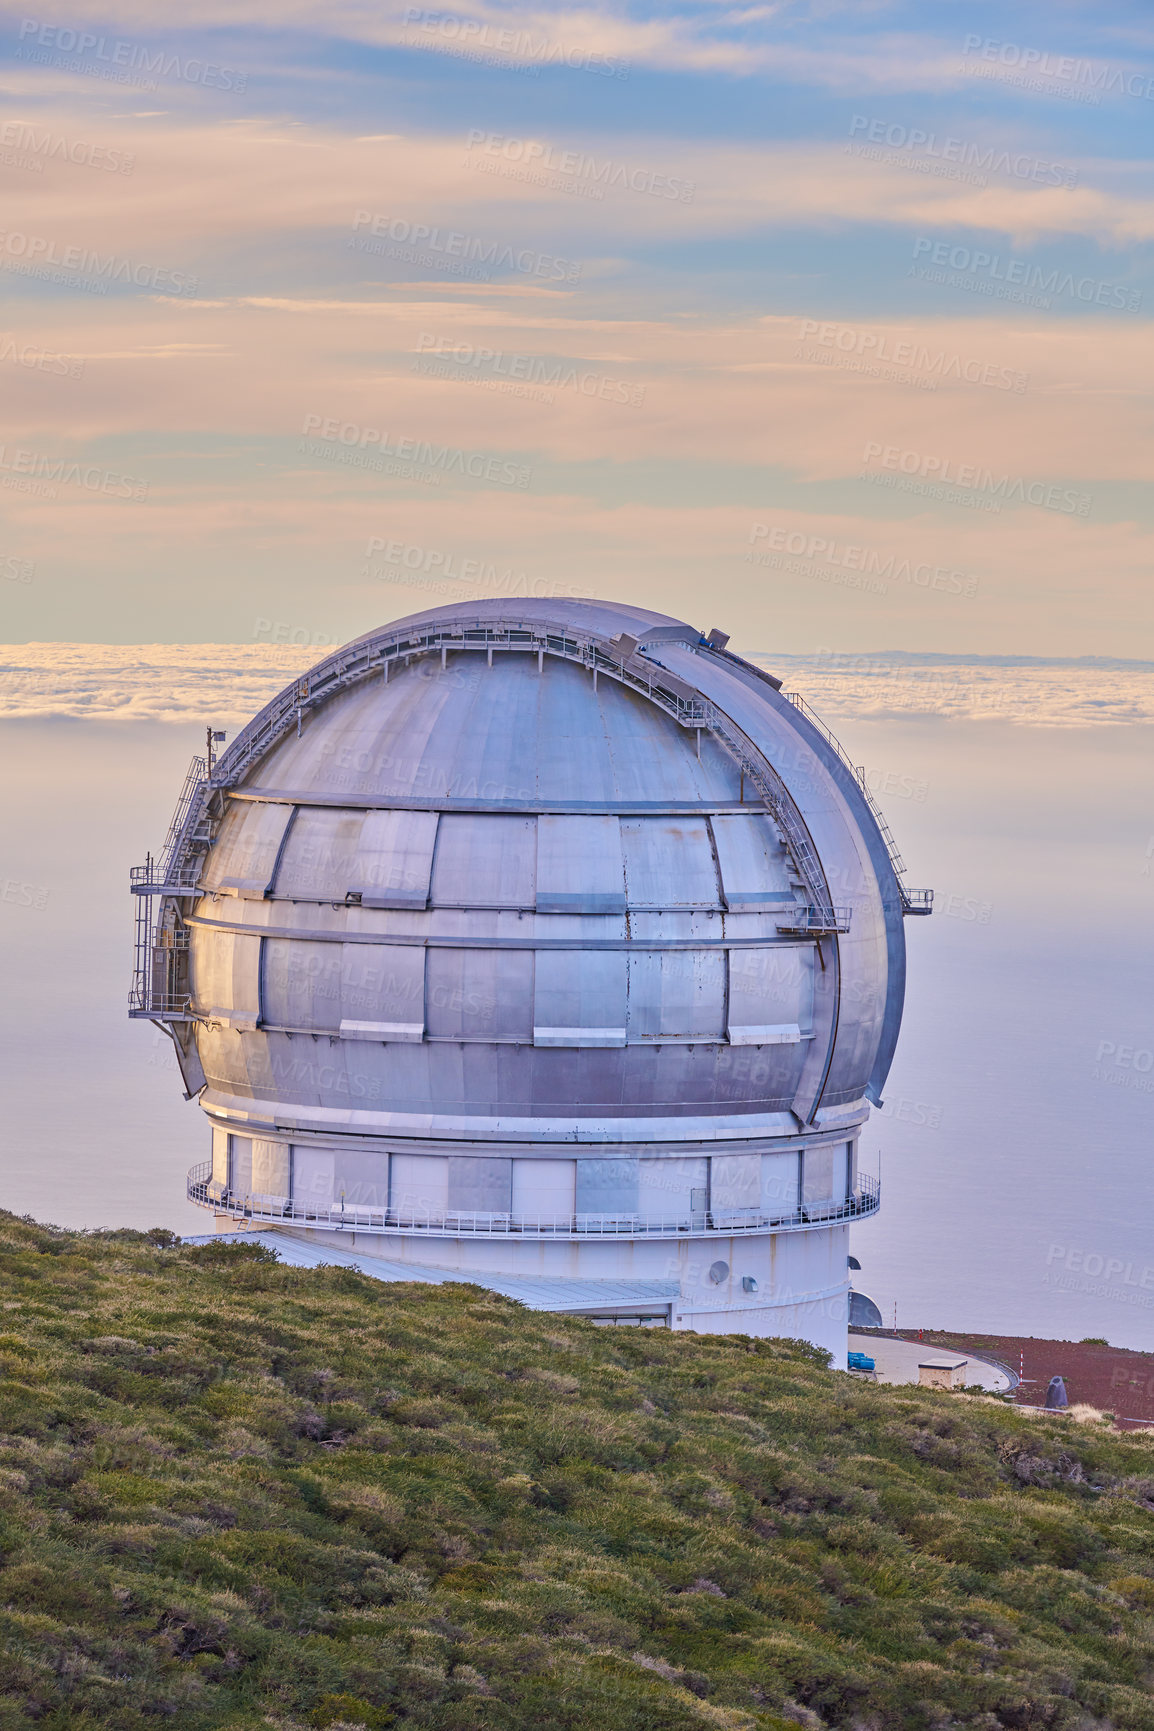 Buy stock photo Scenic view of an astronomy observatory dome in Roque de los Muchachos, La Palma, Spain. Landscape of science infrastructure or building against blue sky with clouds and copyspace abroad or overseas